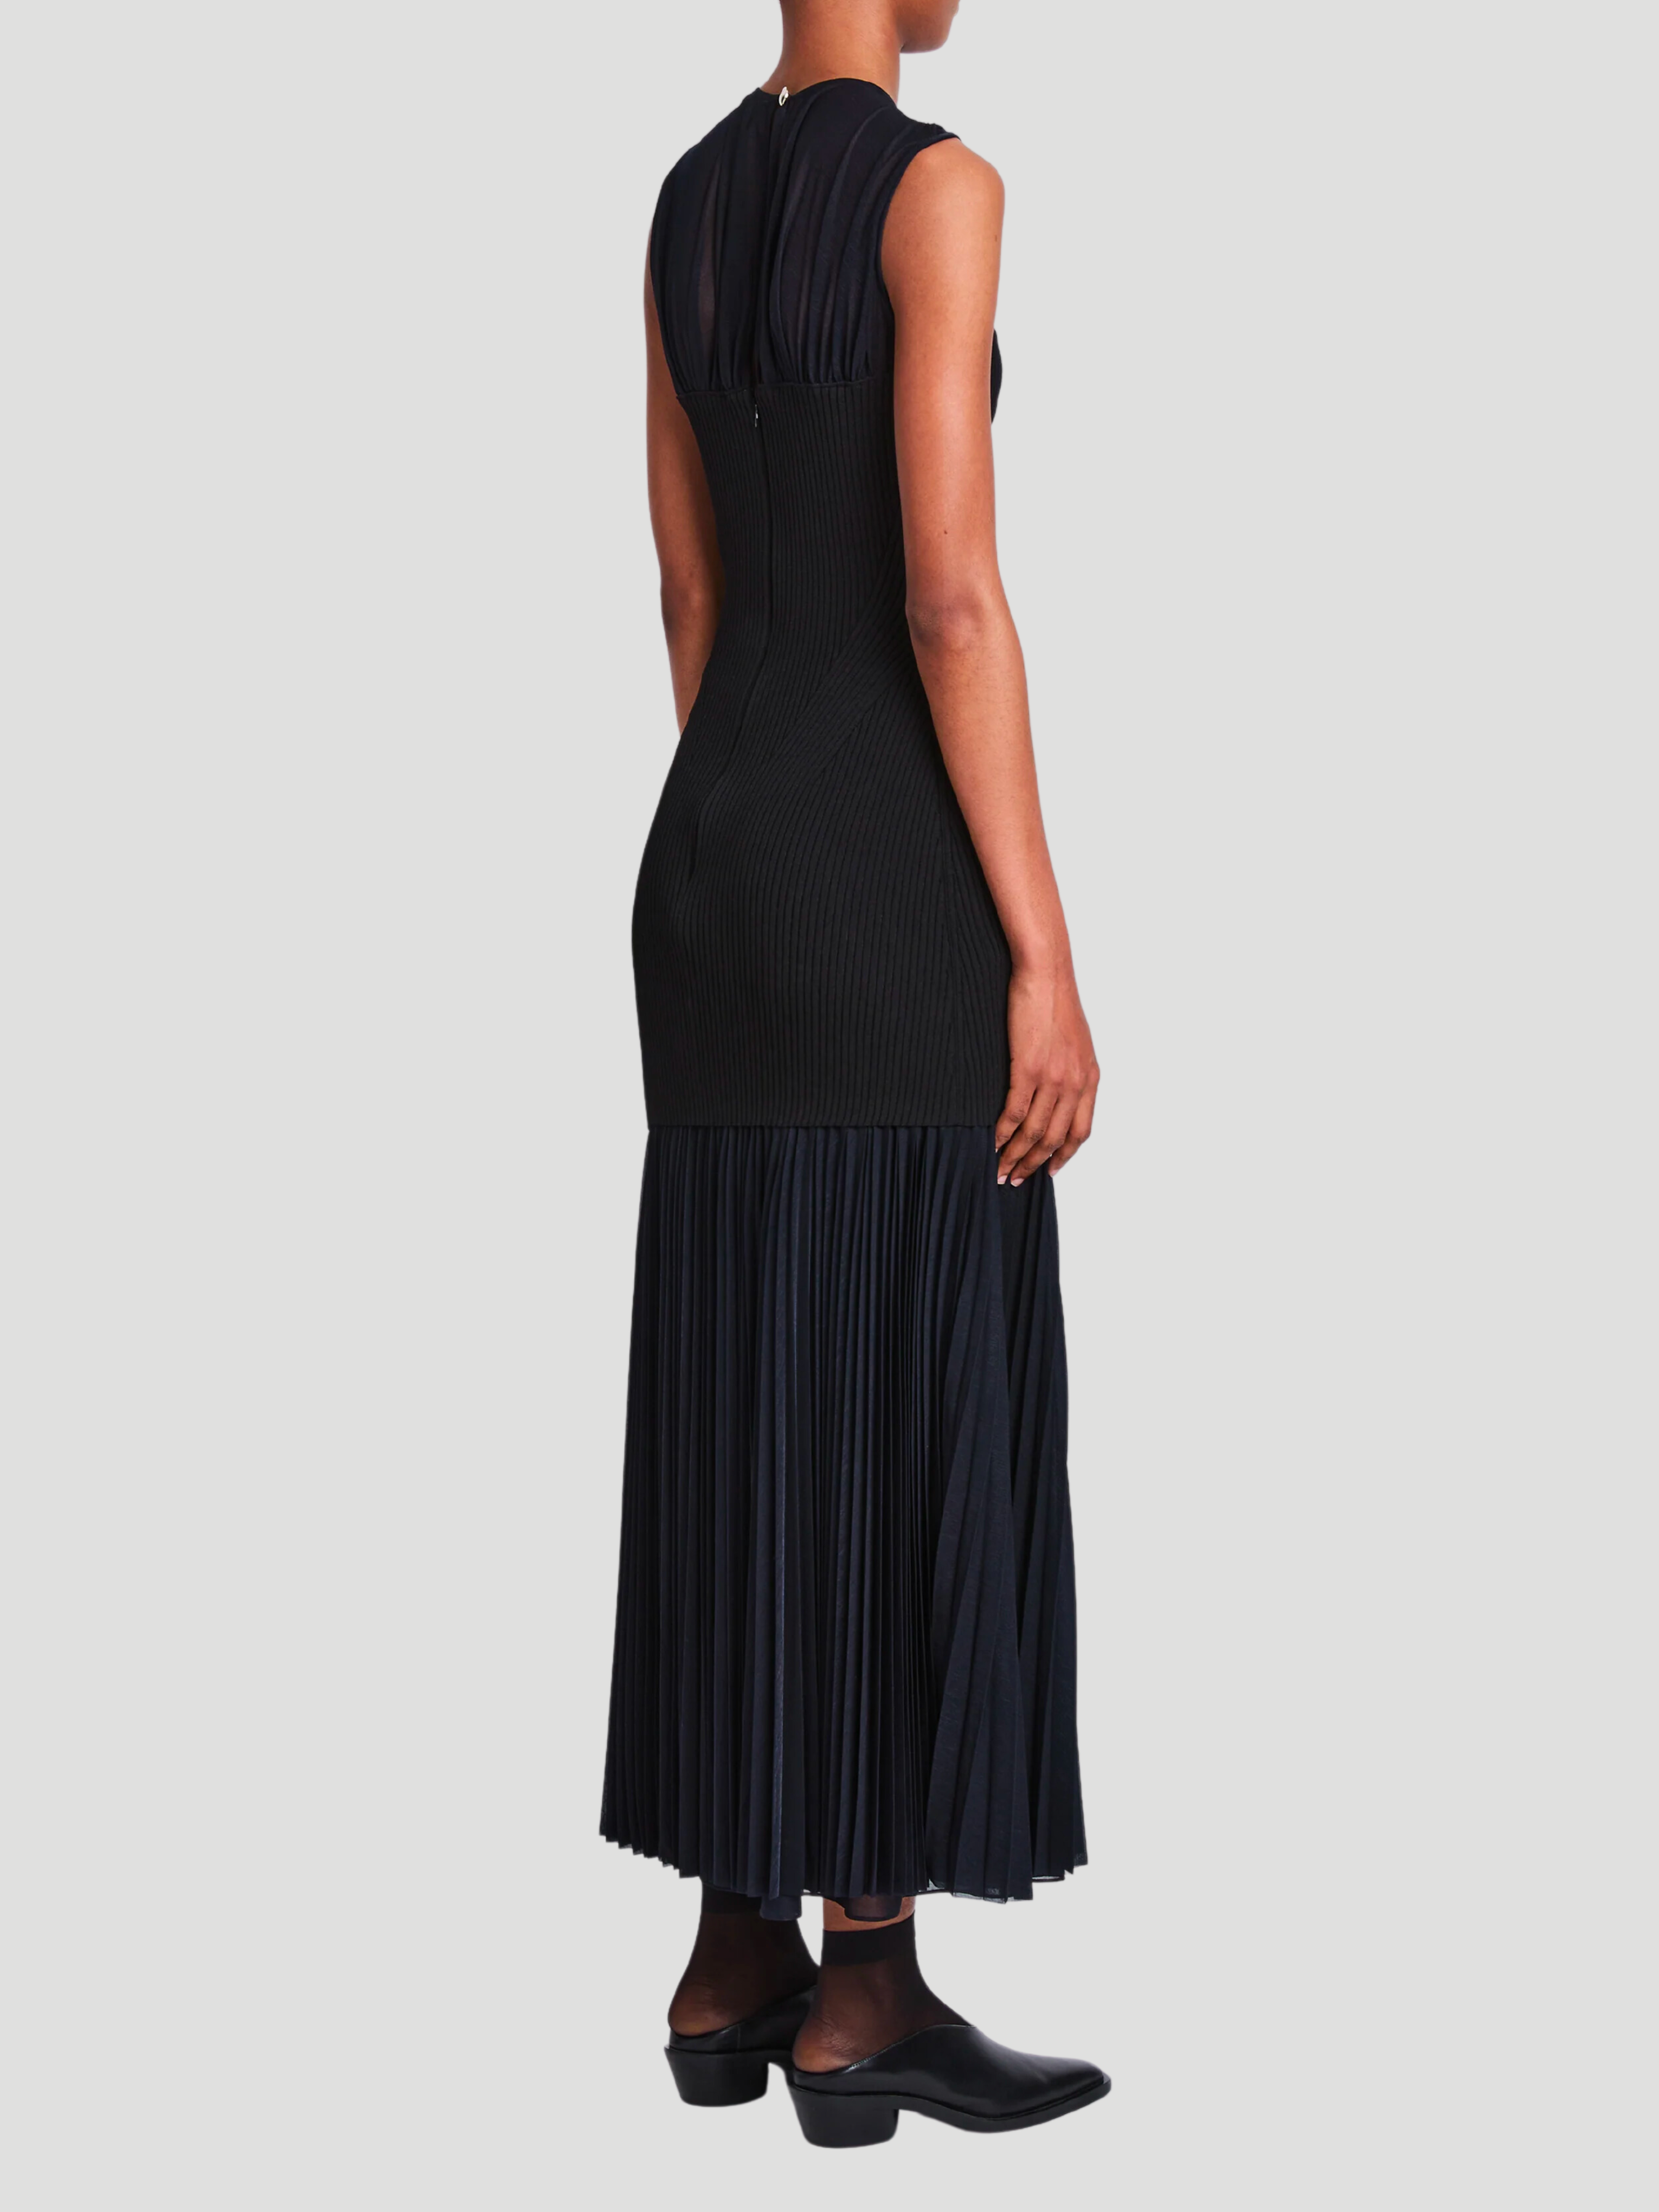 Niki Sheer Pleated Jersey Long Dress with Knit Bodice